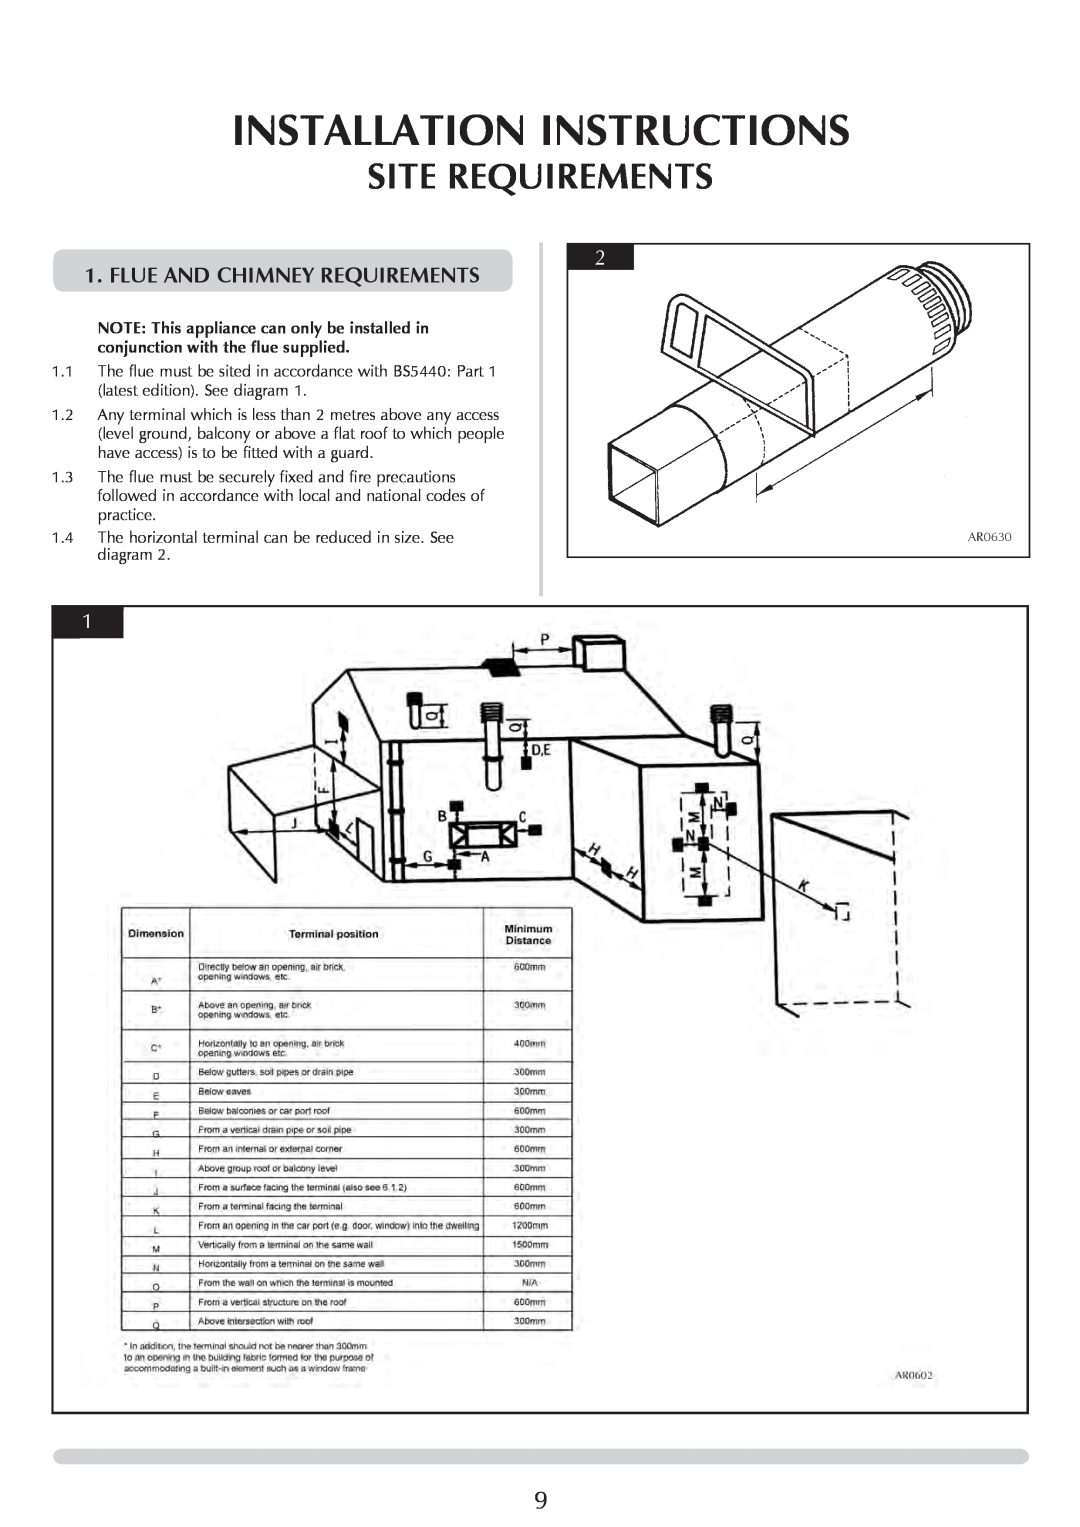 Stovax PR0731 manual Site Requirements, Installation Instructions, Flue and Chimney Requirements 